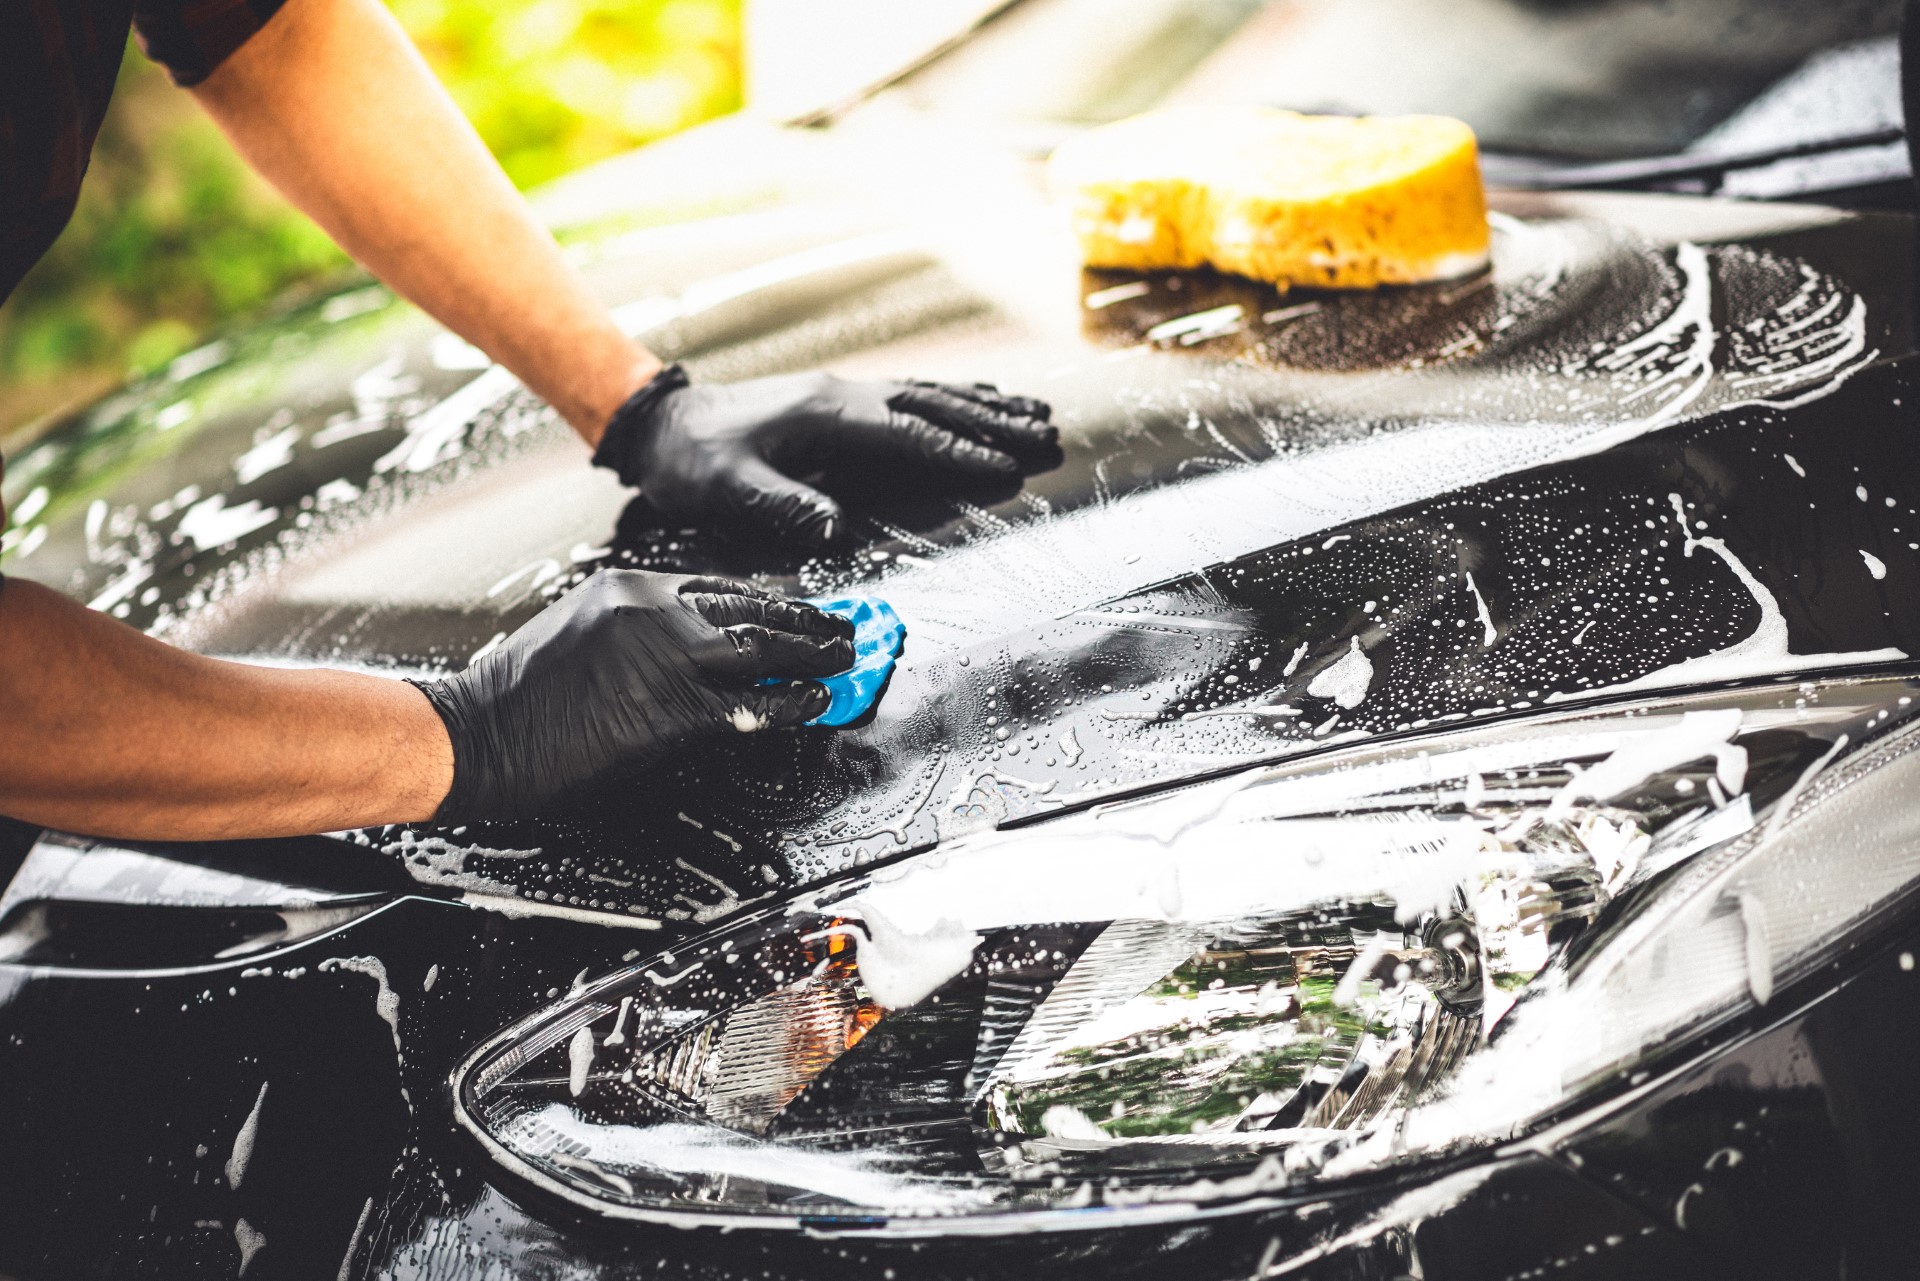 https://colonialcw.com/wp-content/uploads/2021/06/stock-photo-washing-the-black-car-car-cleaning-and-car-care-concept-1445452700.jpg